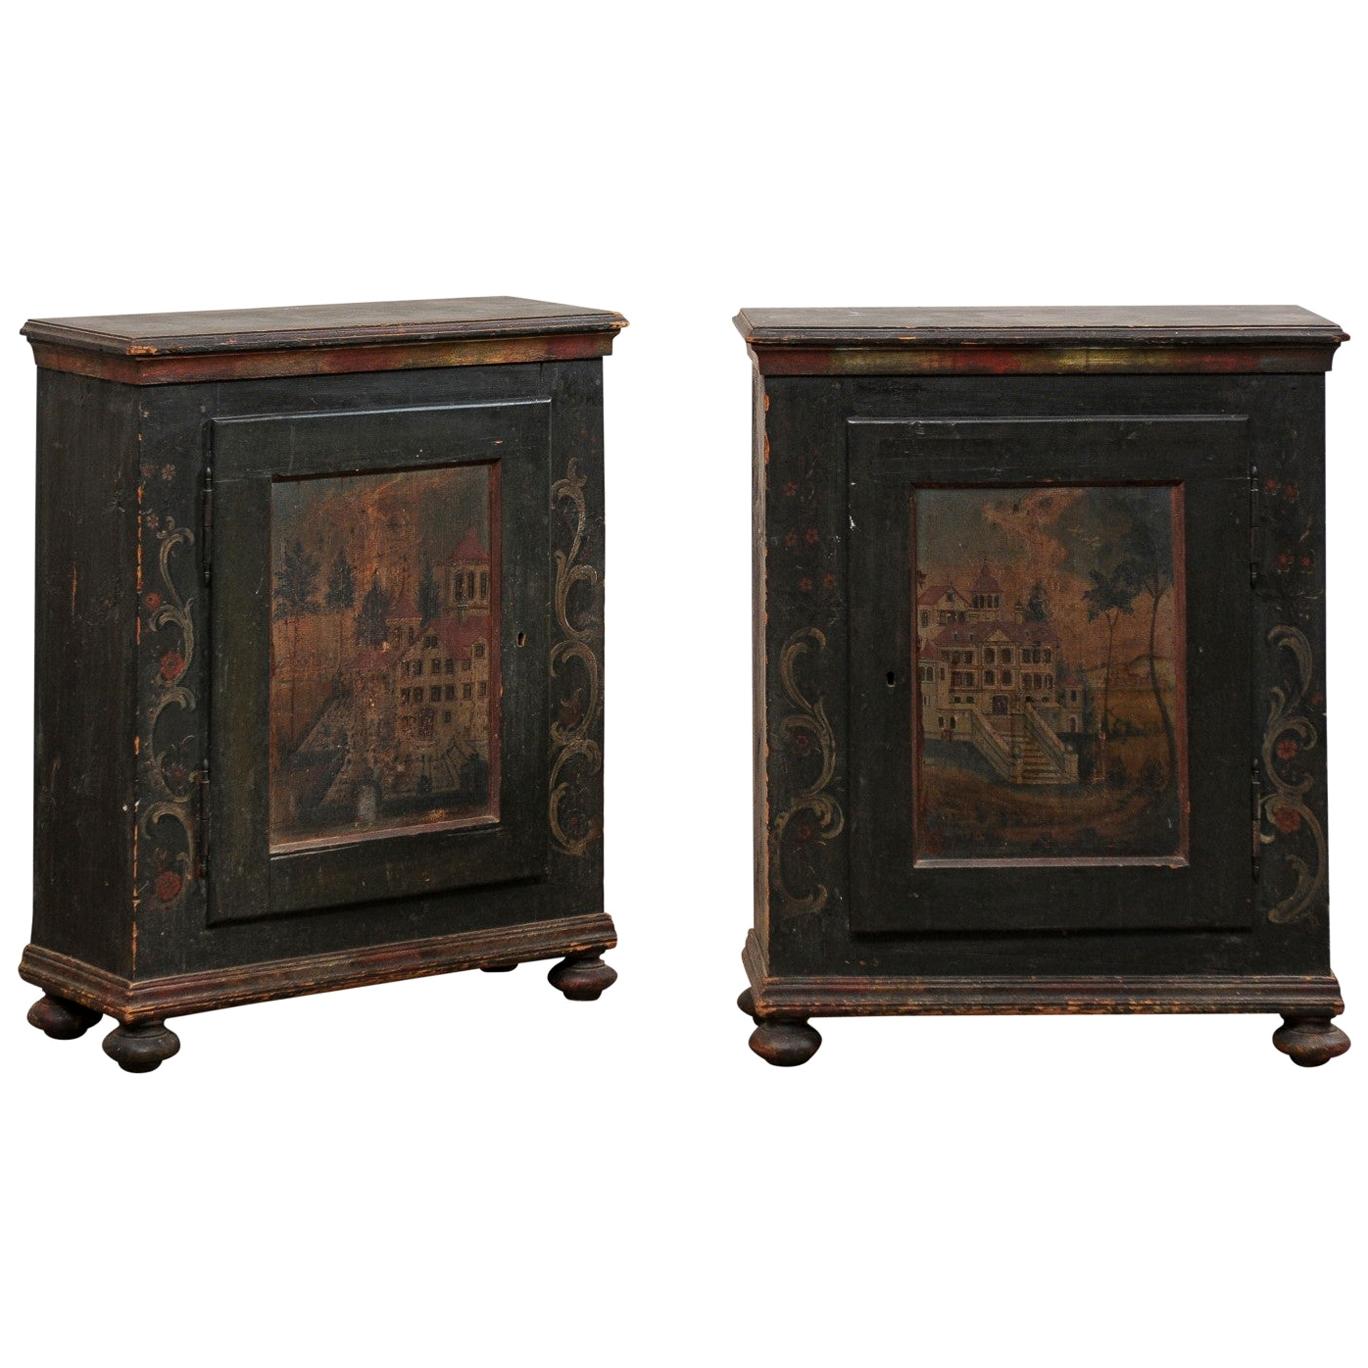 Pair of European Single-Door Cabinets with Original Hand Painted Finish